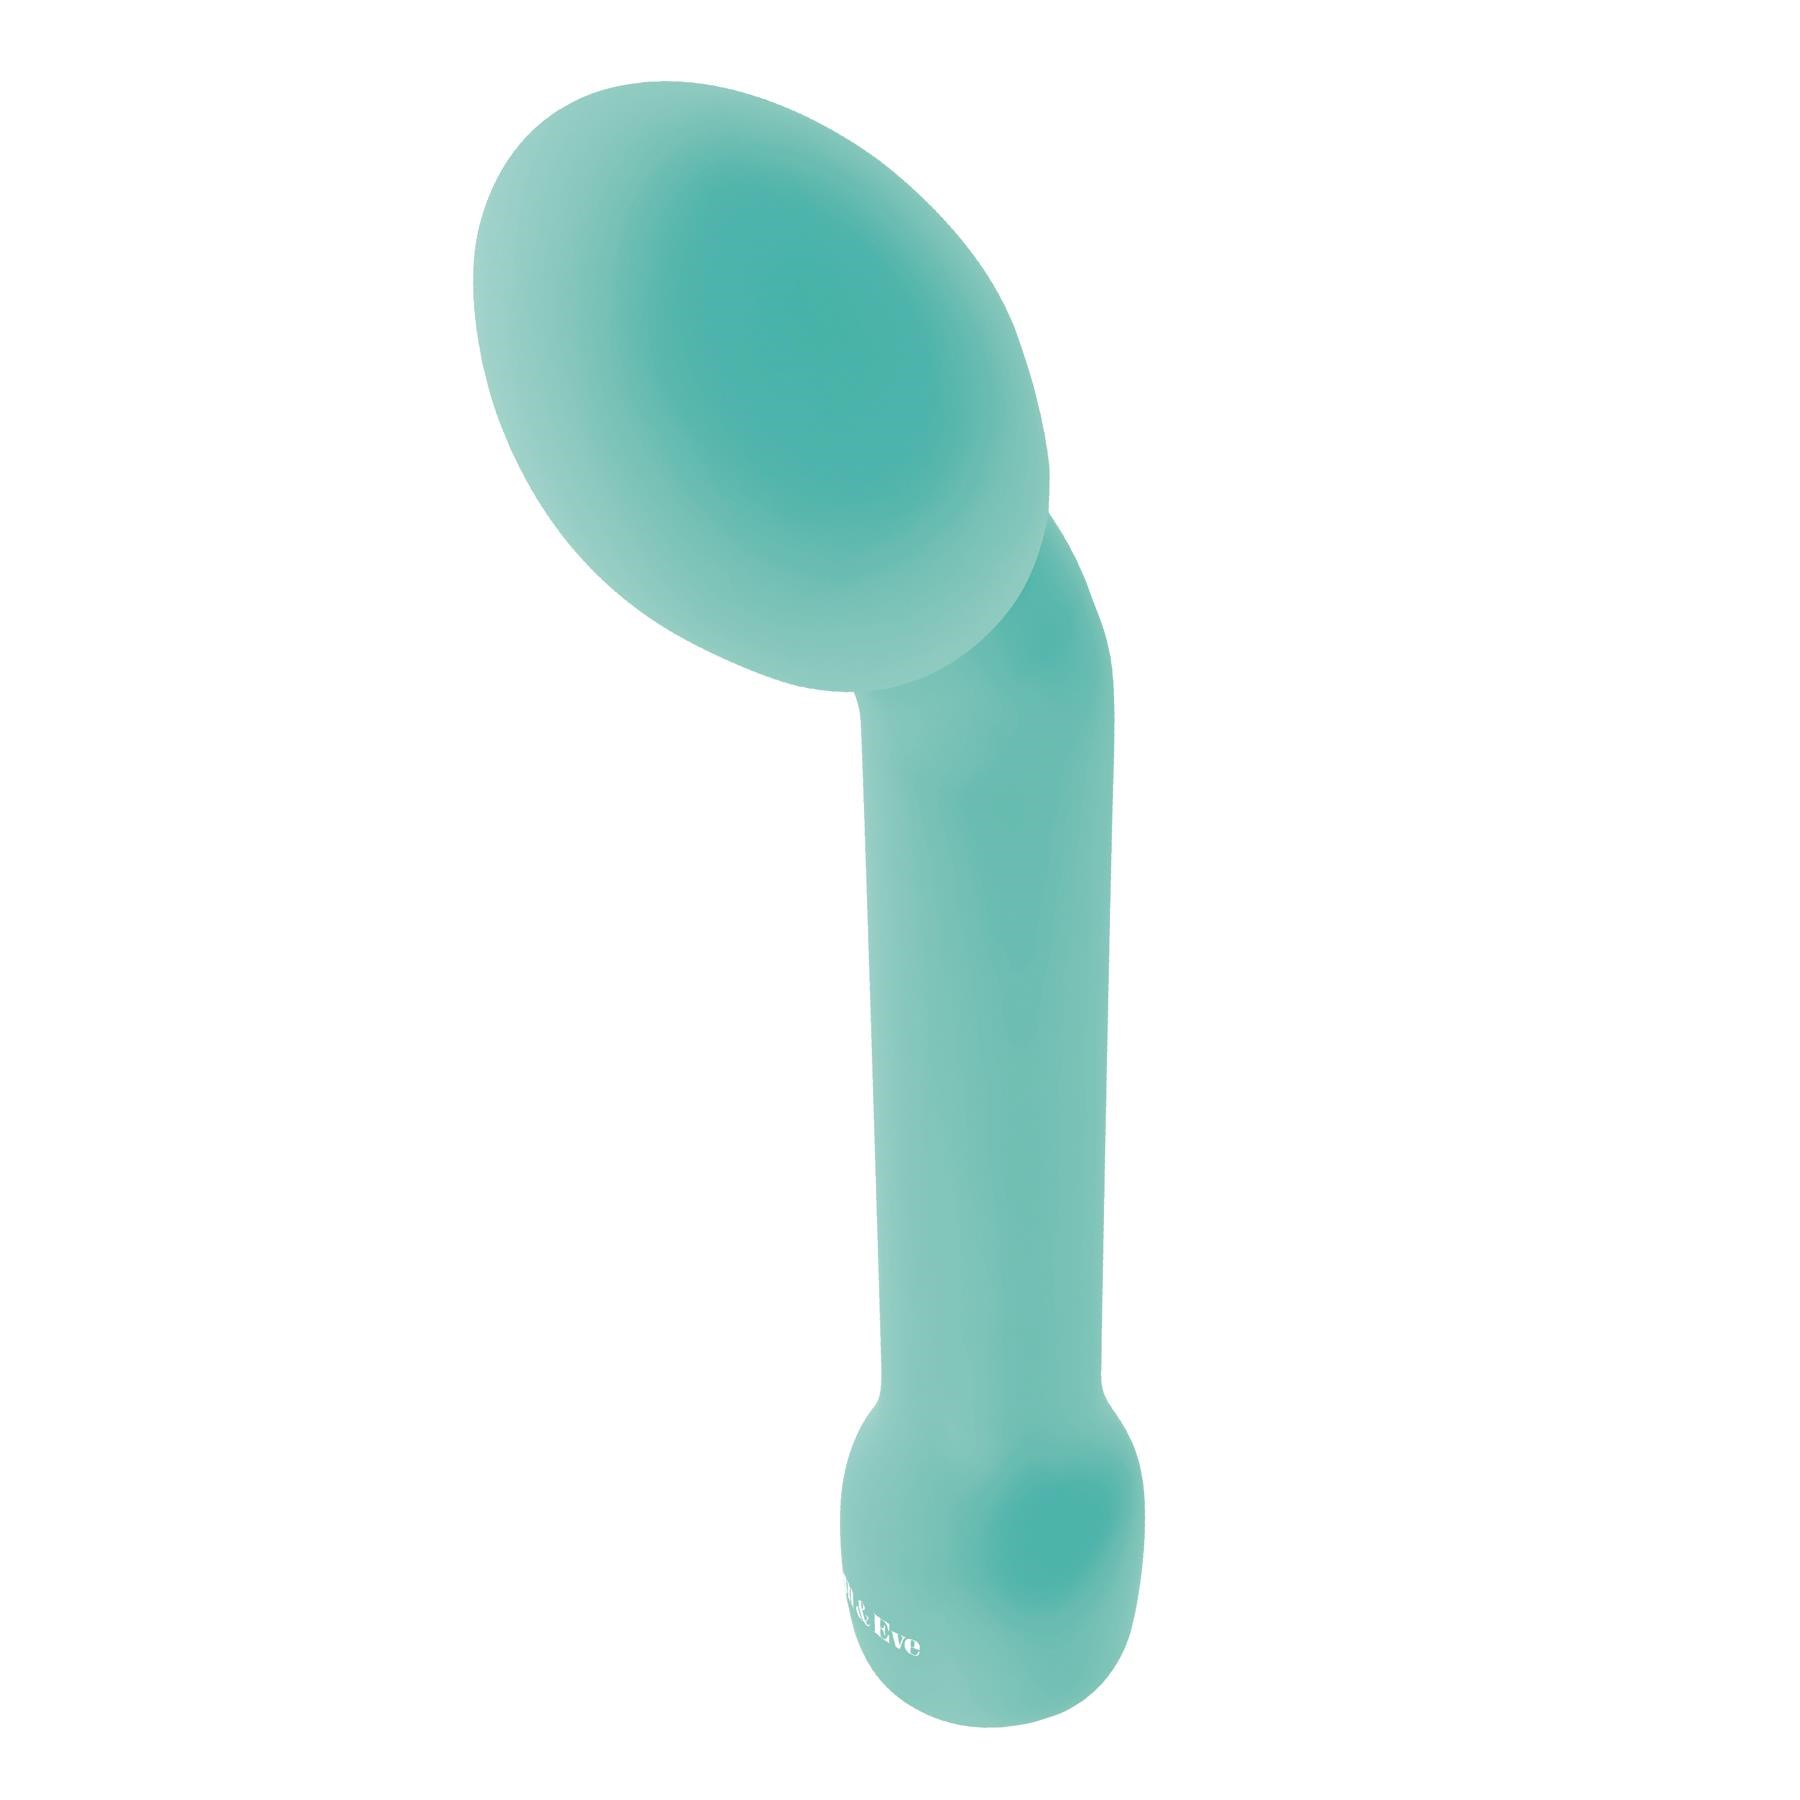 Adam & Eve Rechargeable Silicone G-Gasm Delight Product Shot #4